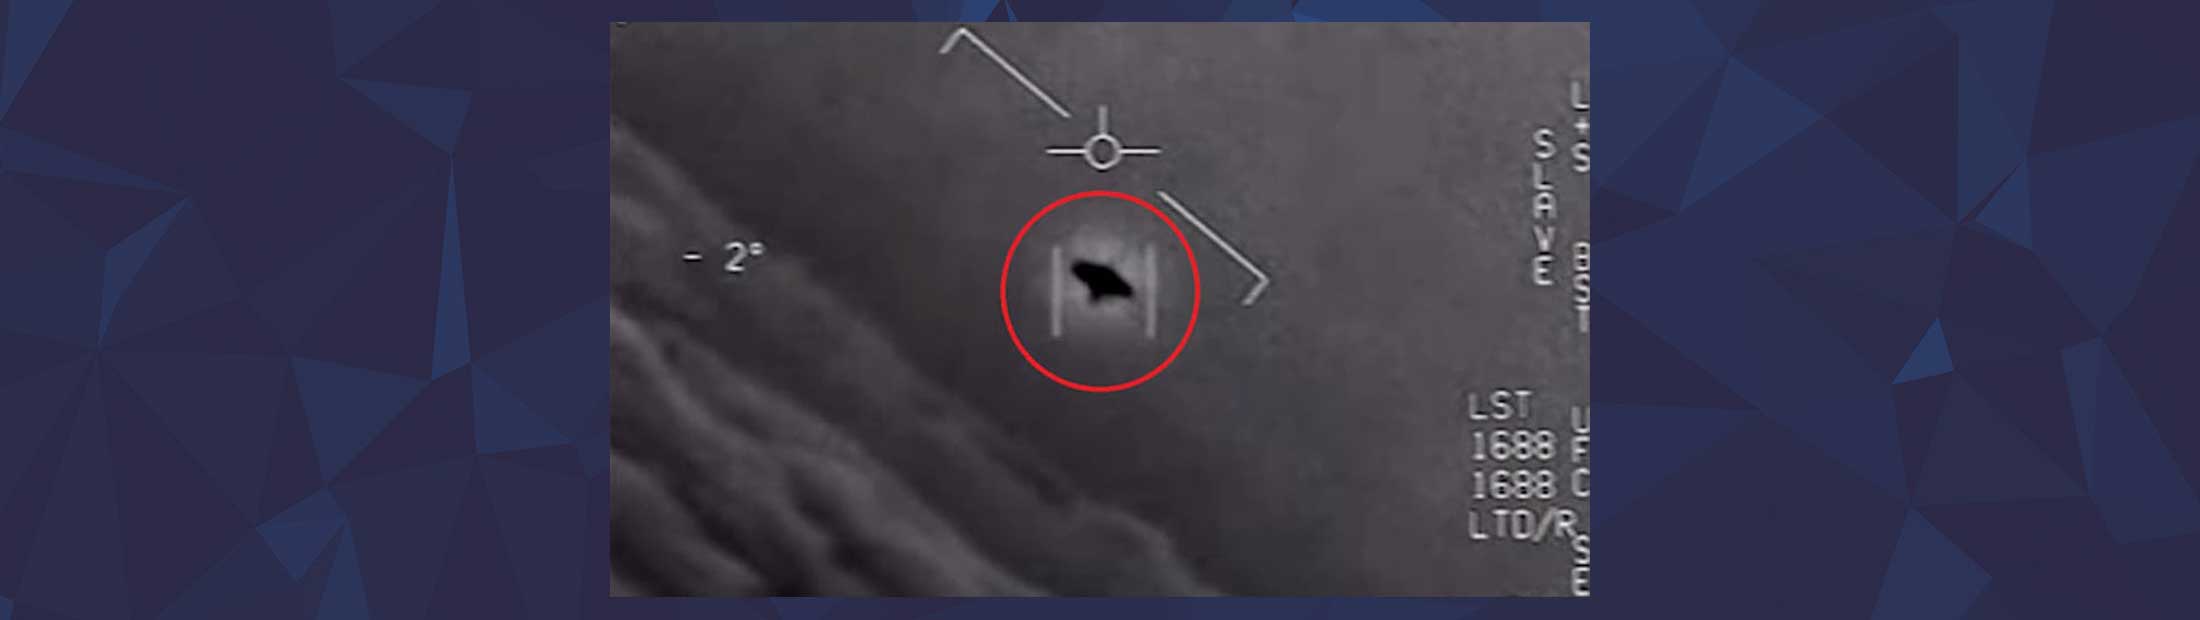 Image of unidentified aircraft from DoD